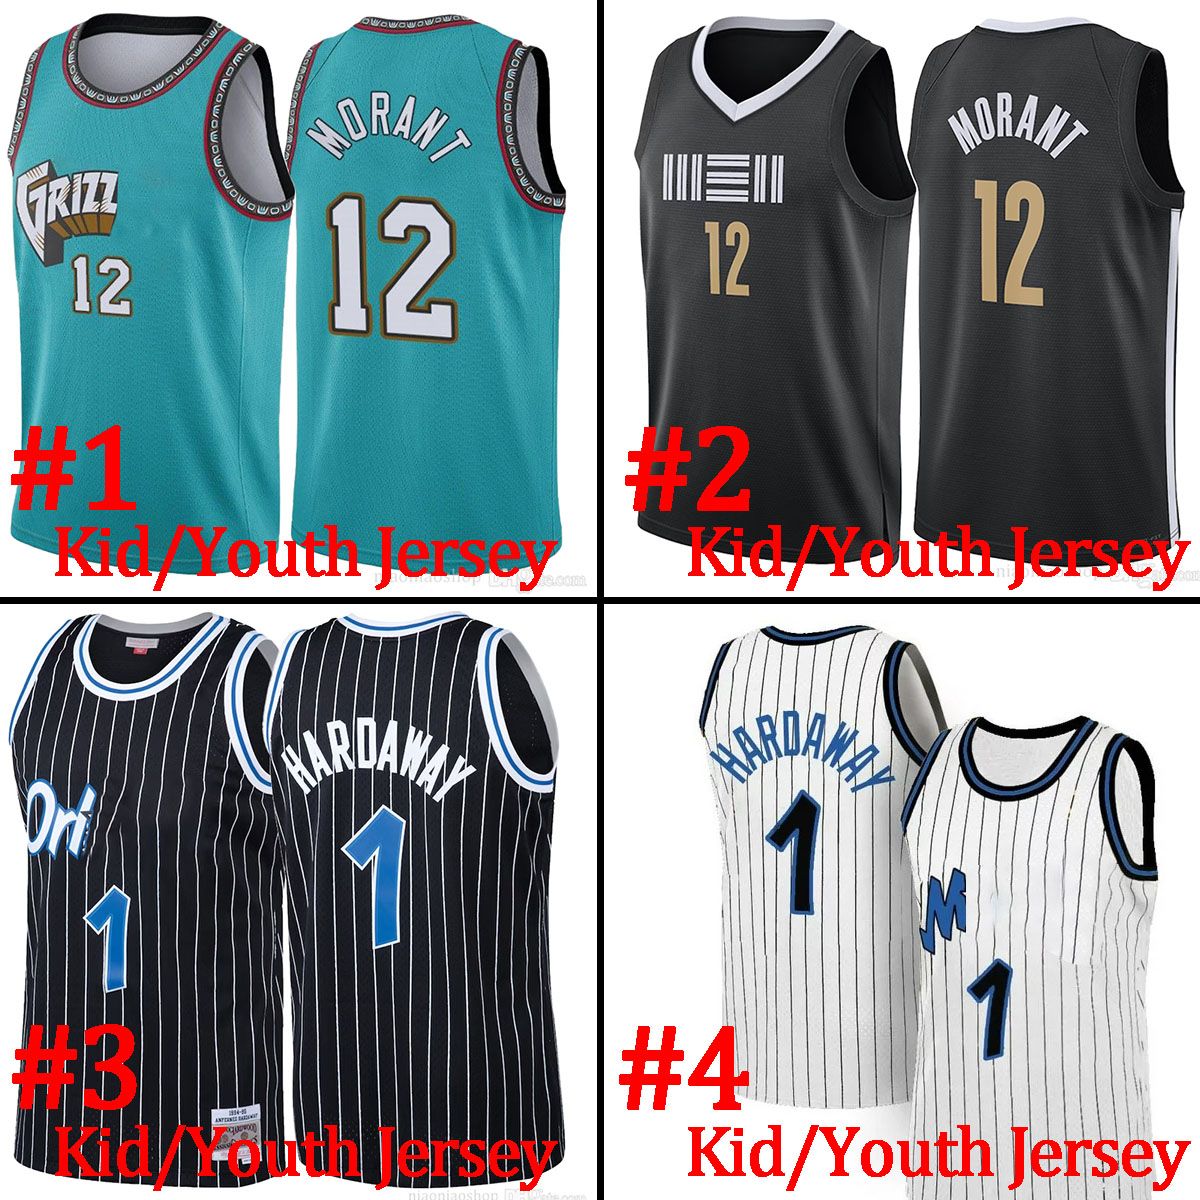 Youth/kid Jersey11